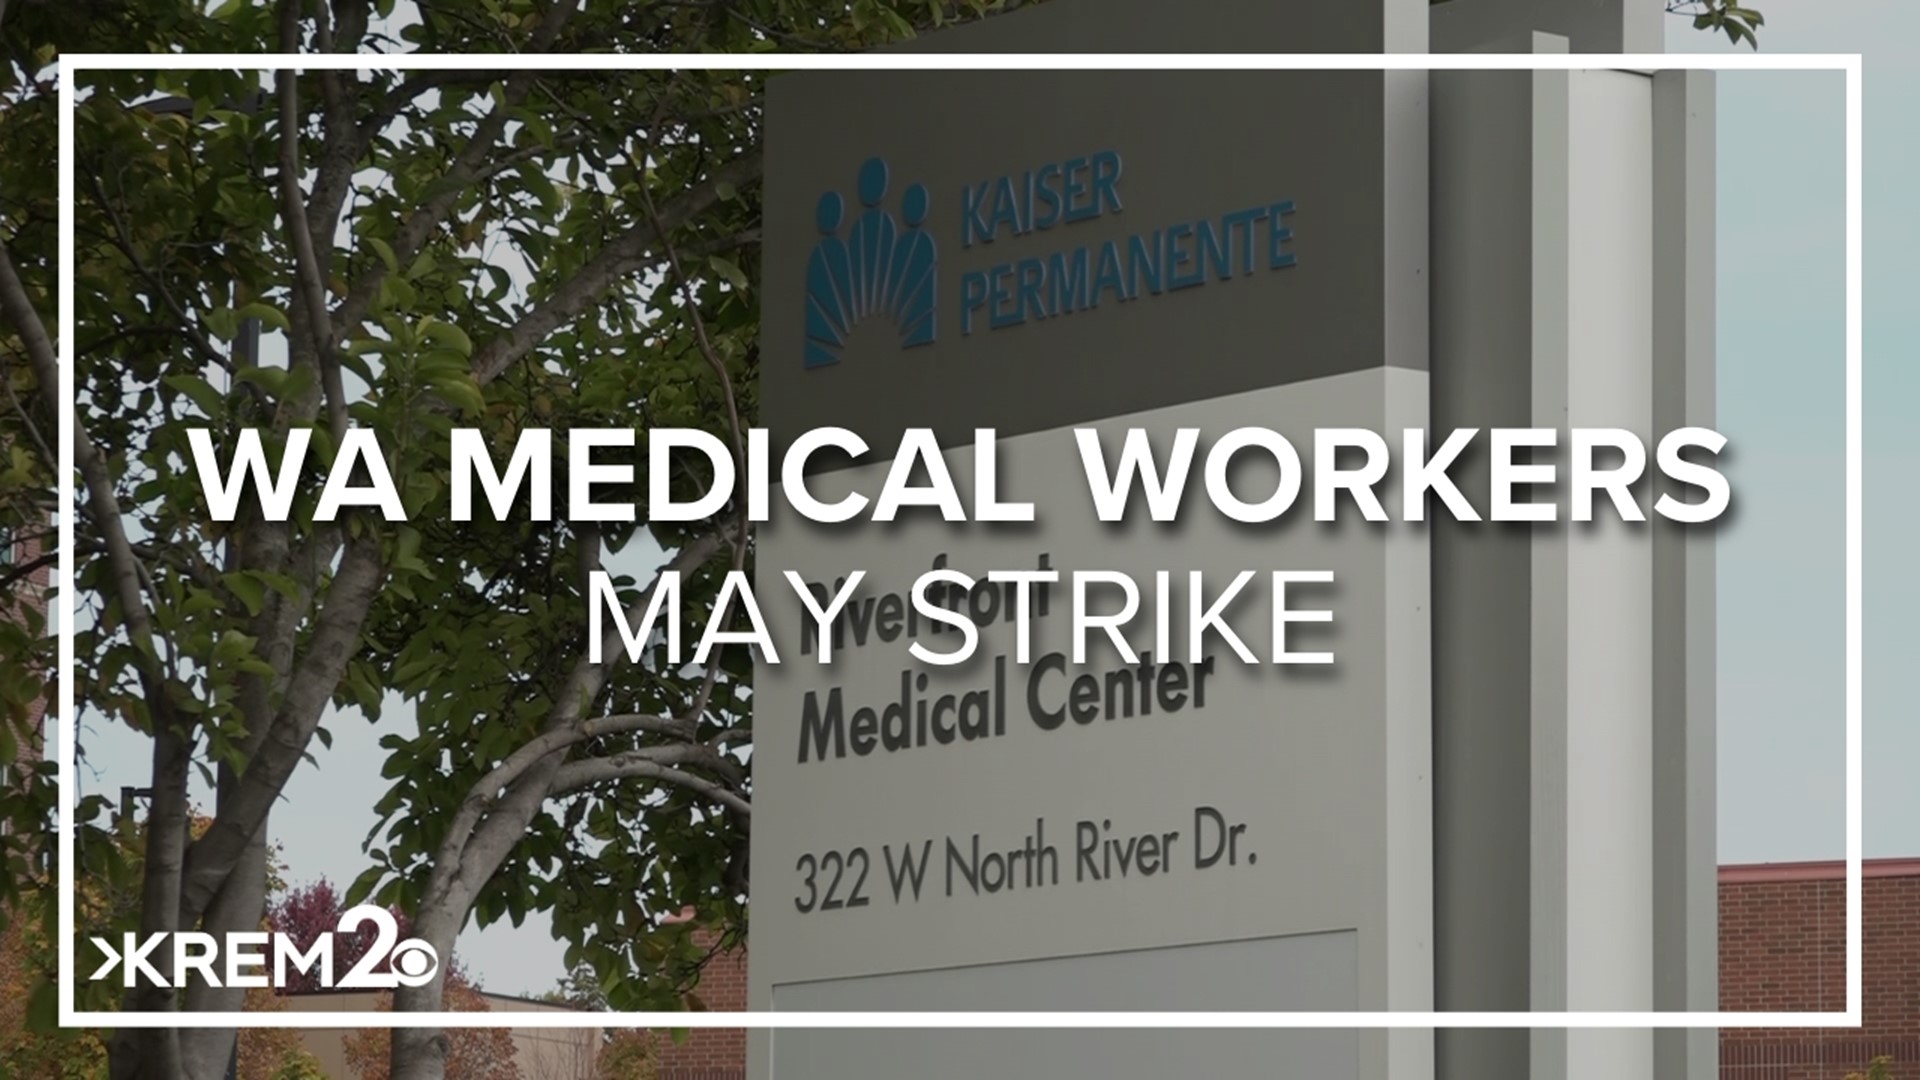 The union has been under contract negotiations since August, with the biggest concern being unsafe staffing levels.